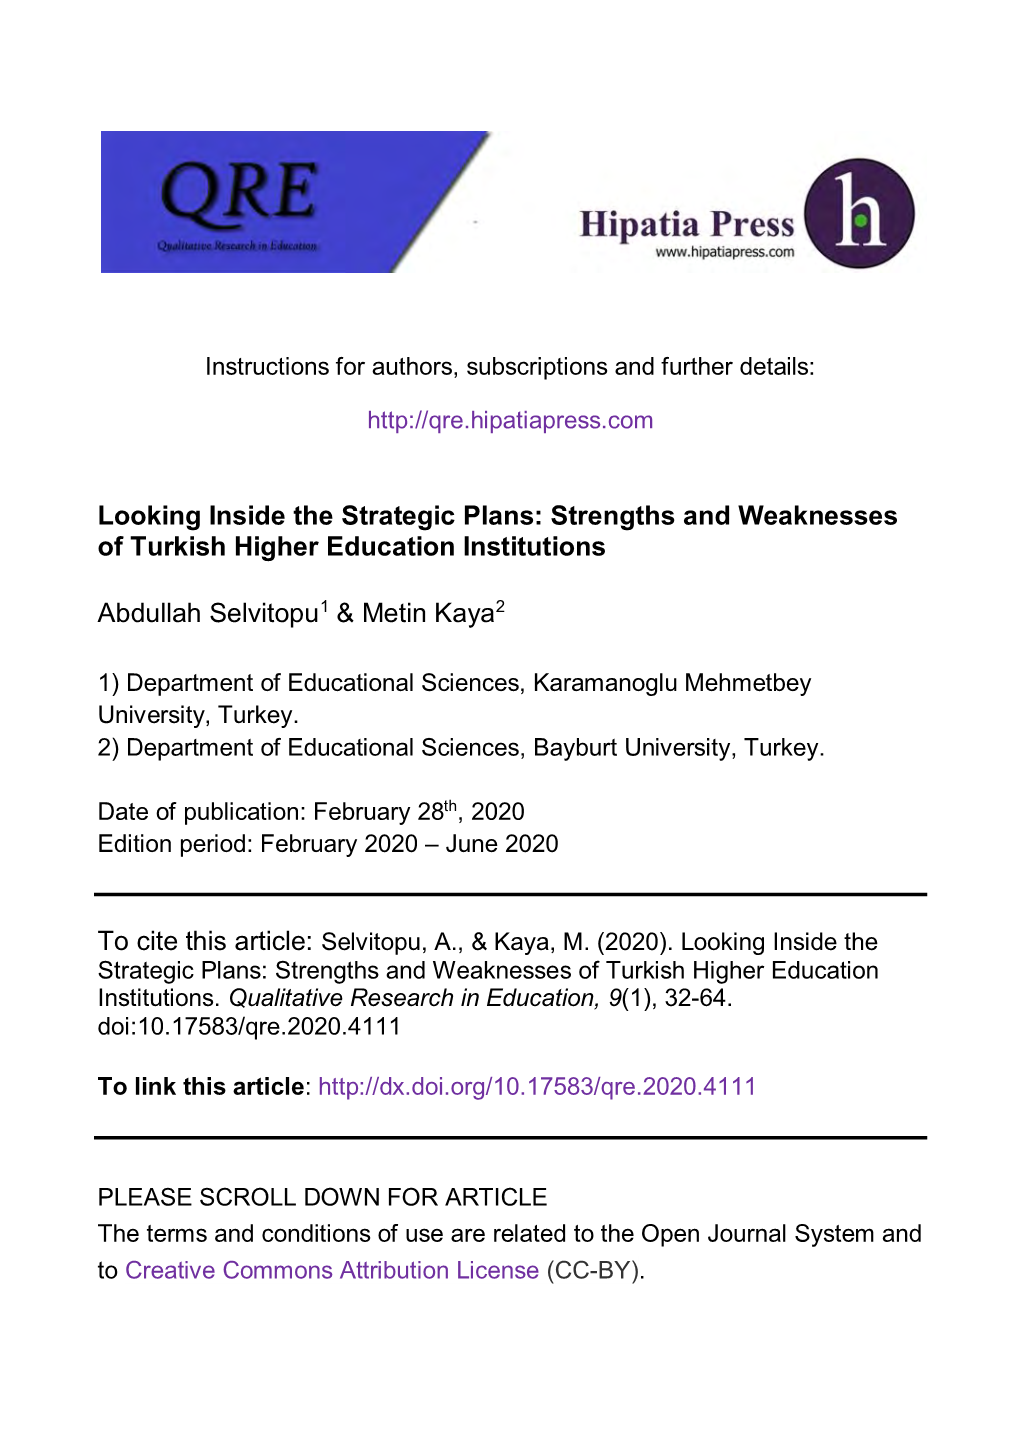 Looking Inside the Strategic Plans: Strengths and Weaknesses of Turkish Higher Education Institutions